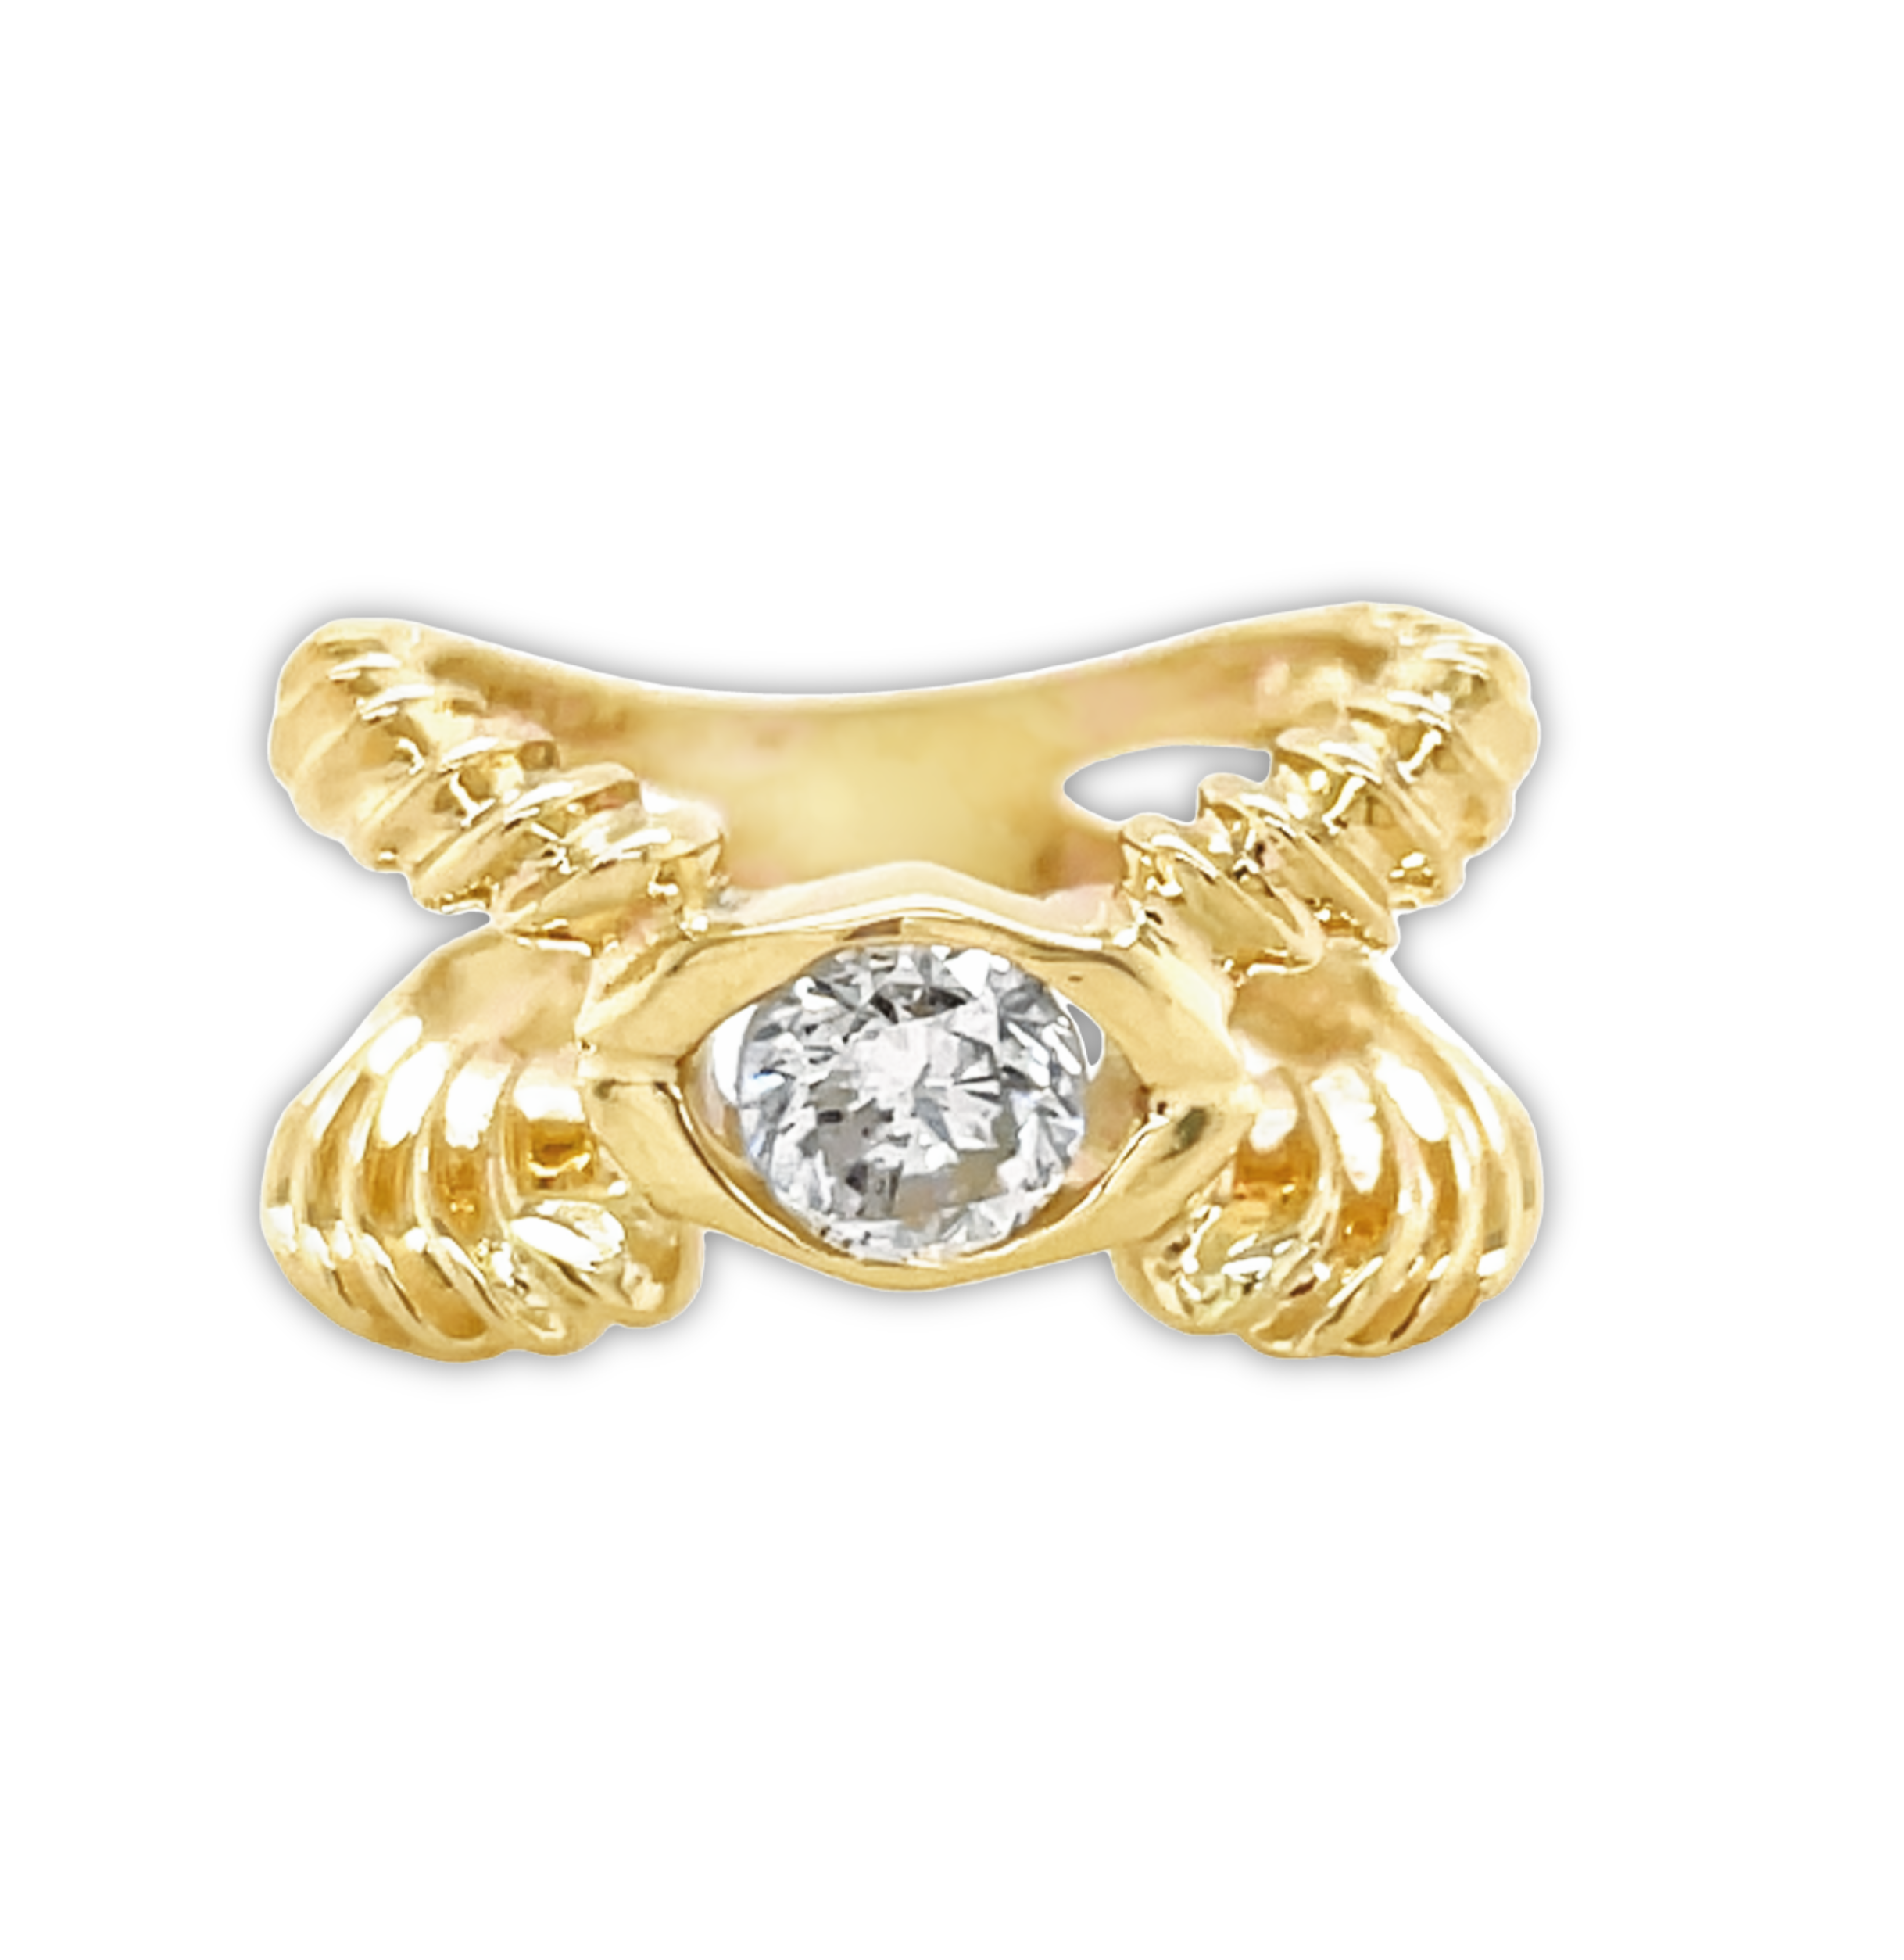 A breathtakingly beautiful design, this 14k yellow gold Criss Cross Solitaire Ring will captivate all who lay eyes on it! The 0.74ct round diamond sparkles atop the 11mm wide shank, with its glamorous double corrugated design. Size 5.5 (resizable), this ring is perfect for any occasion!